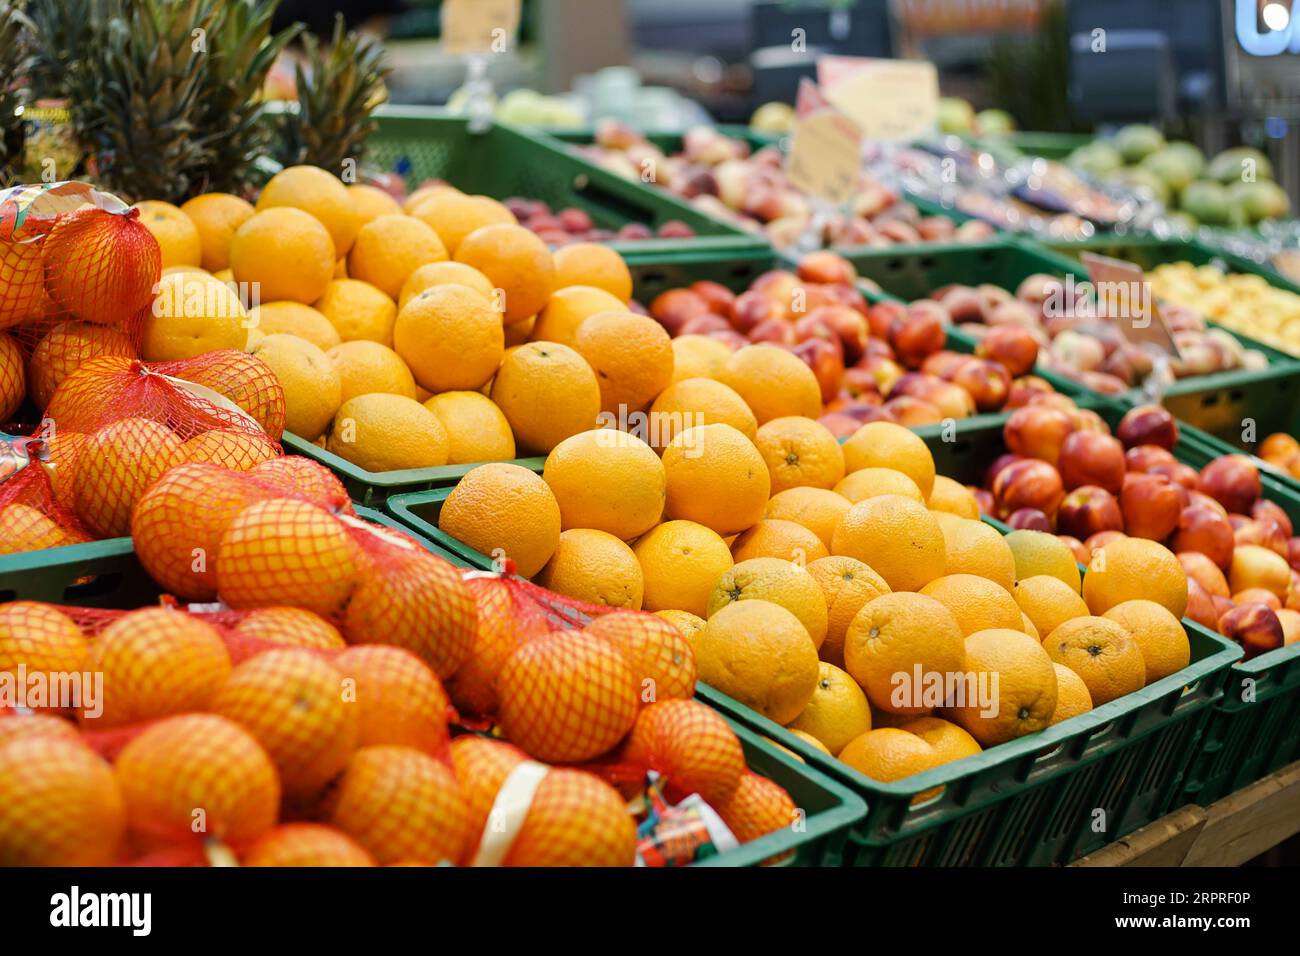 Orlando,FL/USA -10/8/19: The fresh produce aisle of a grocery store with  colorful fresh fruits and vegetables ready to be purchased by consumers  Stock Photo - Alamy